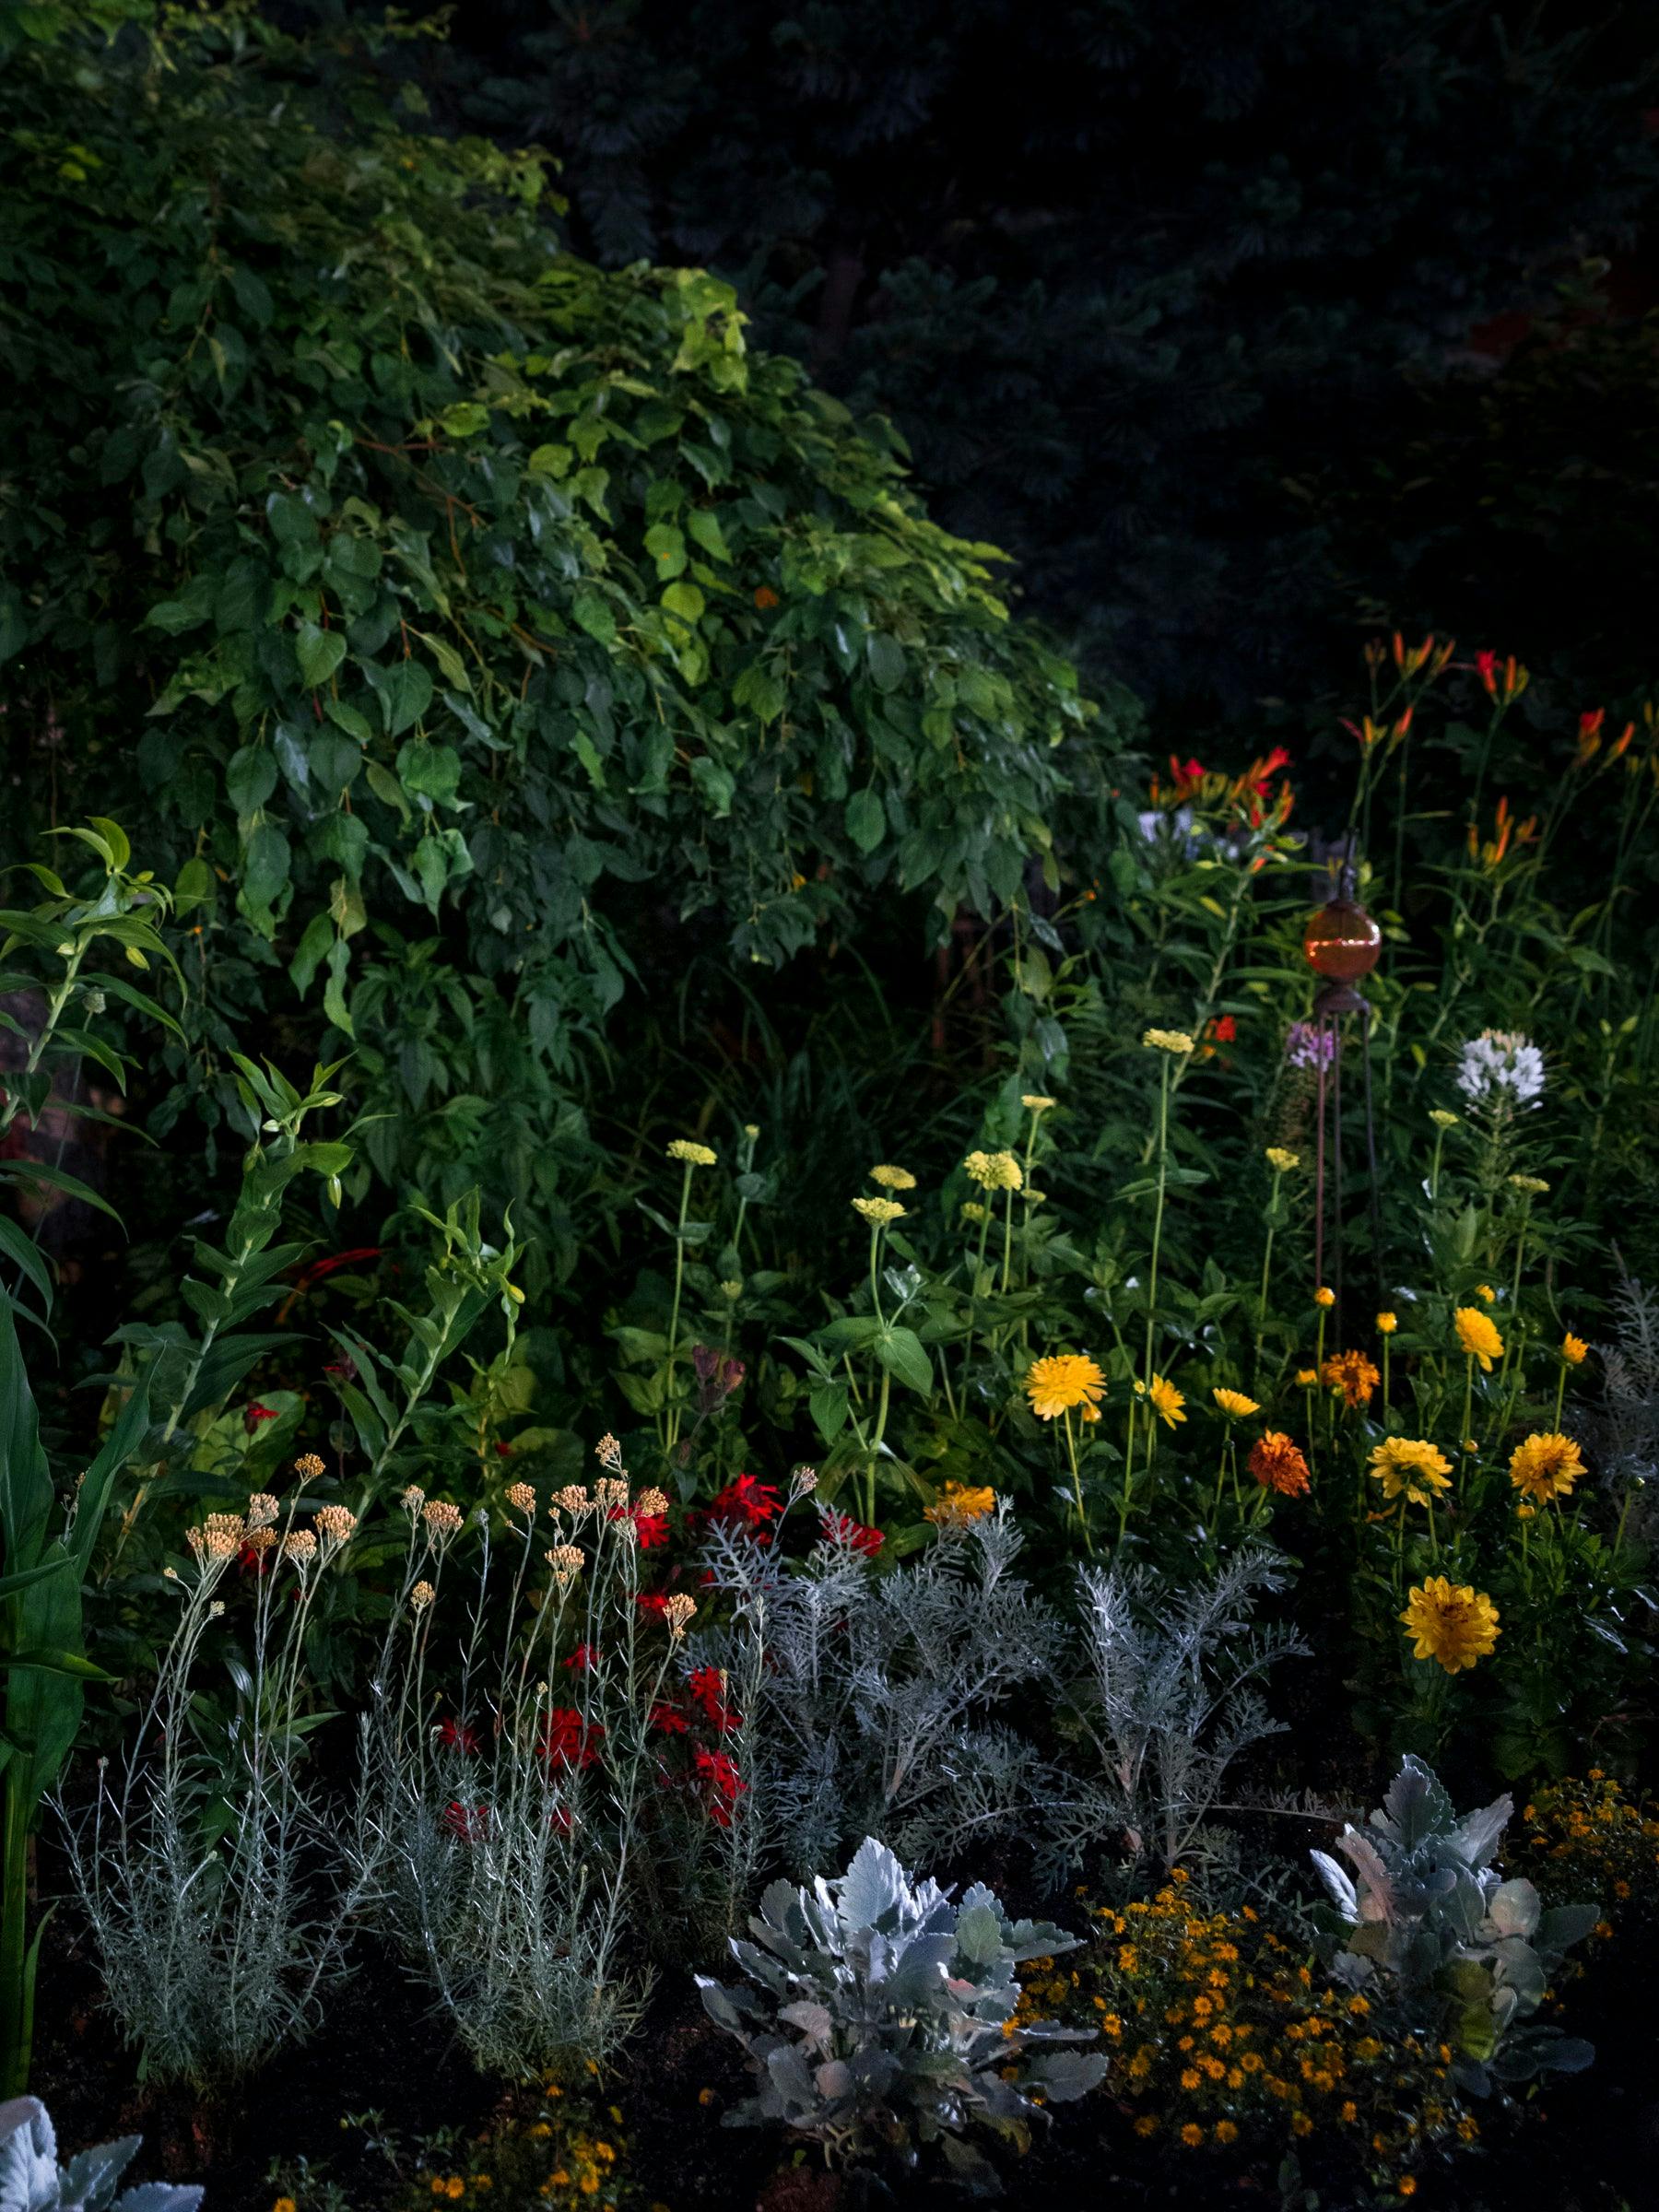 Photography by Anna Beeke titled "Midnight in the Garden #82".